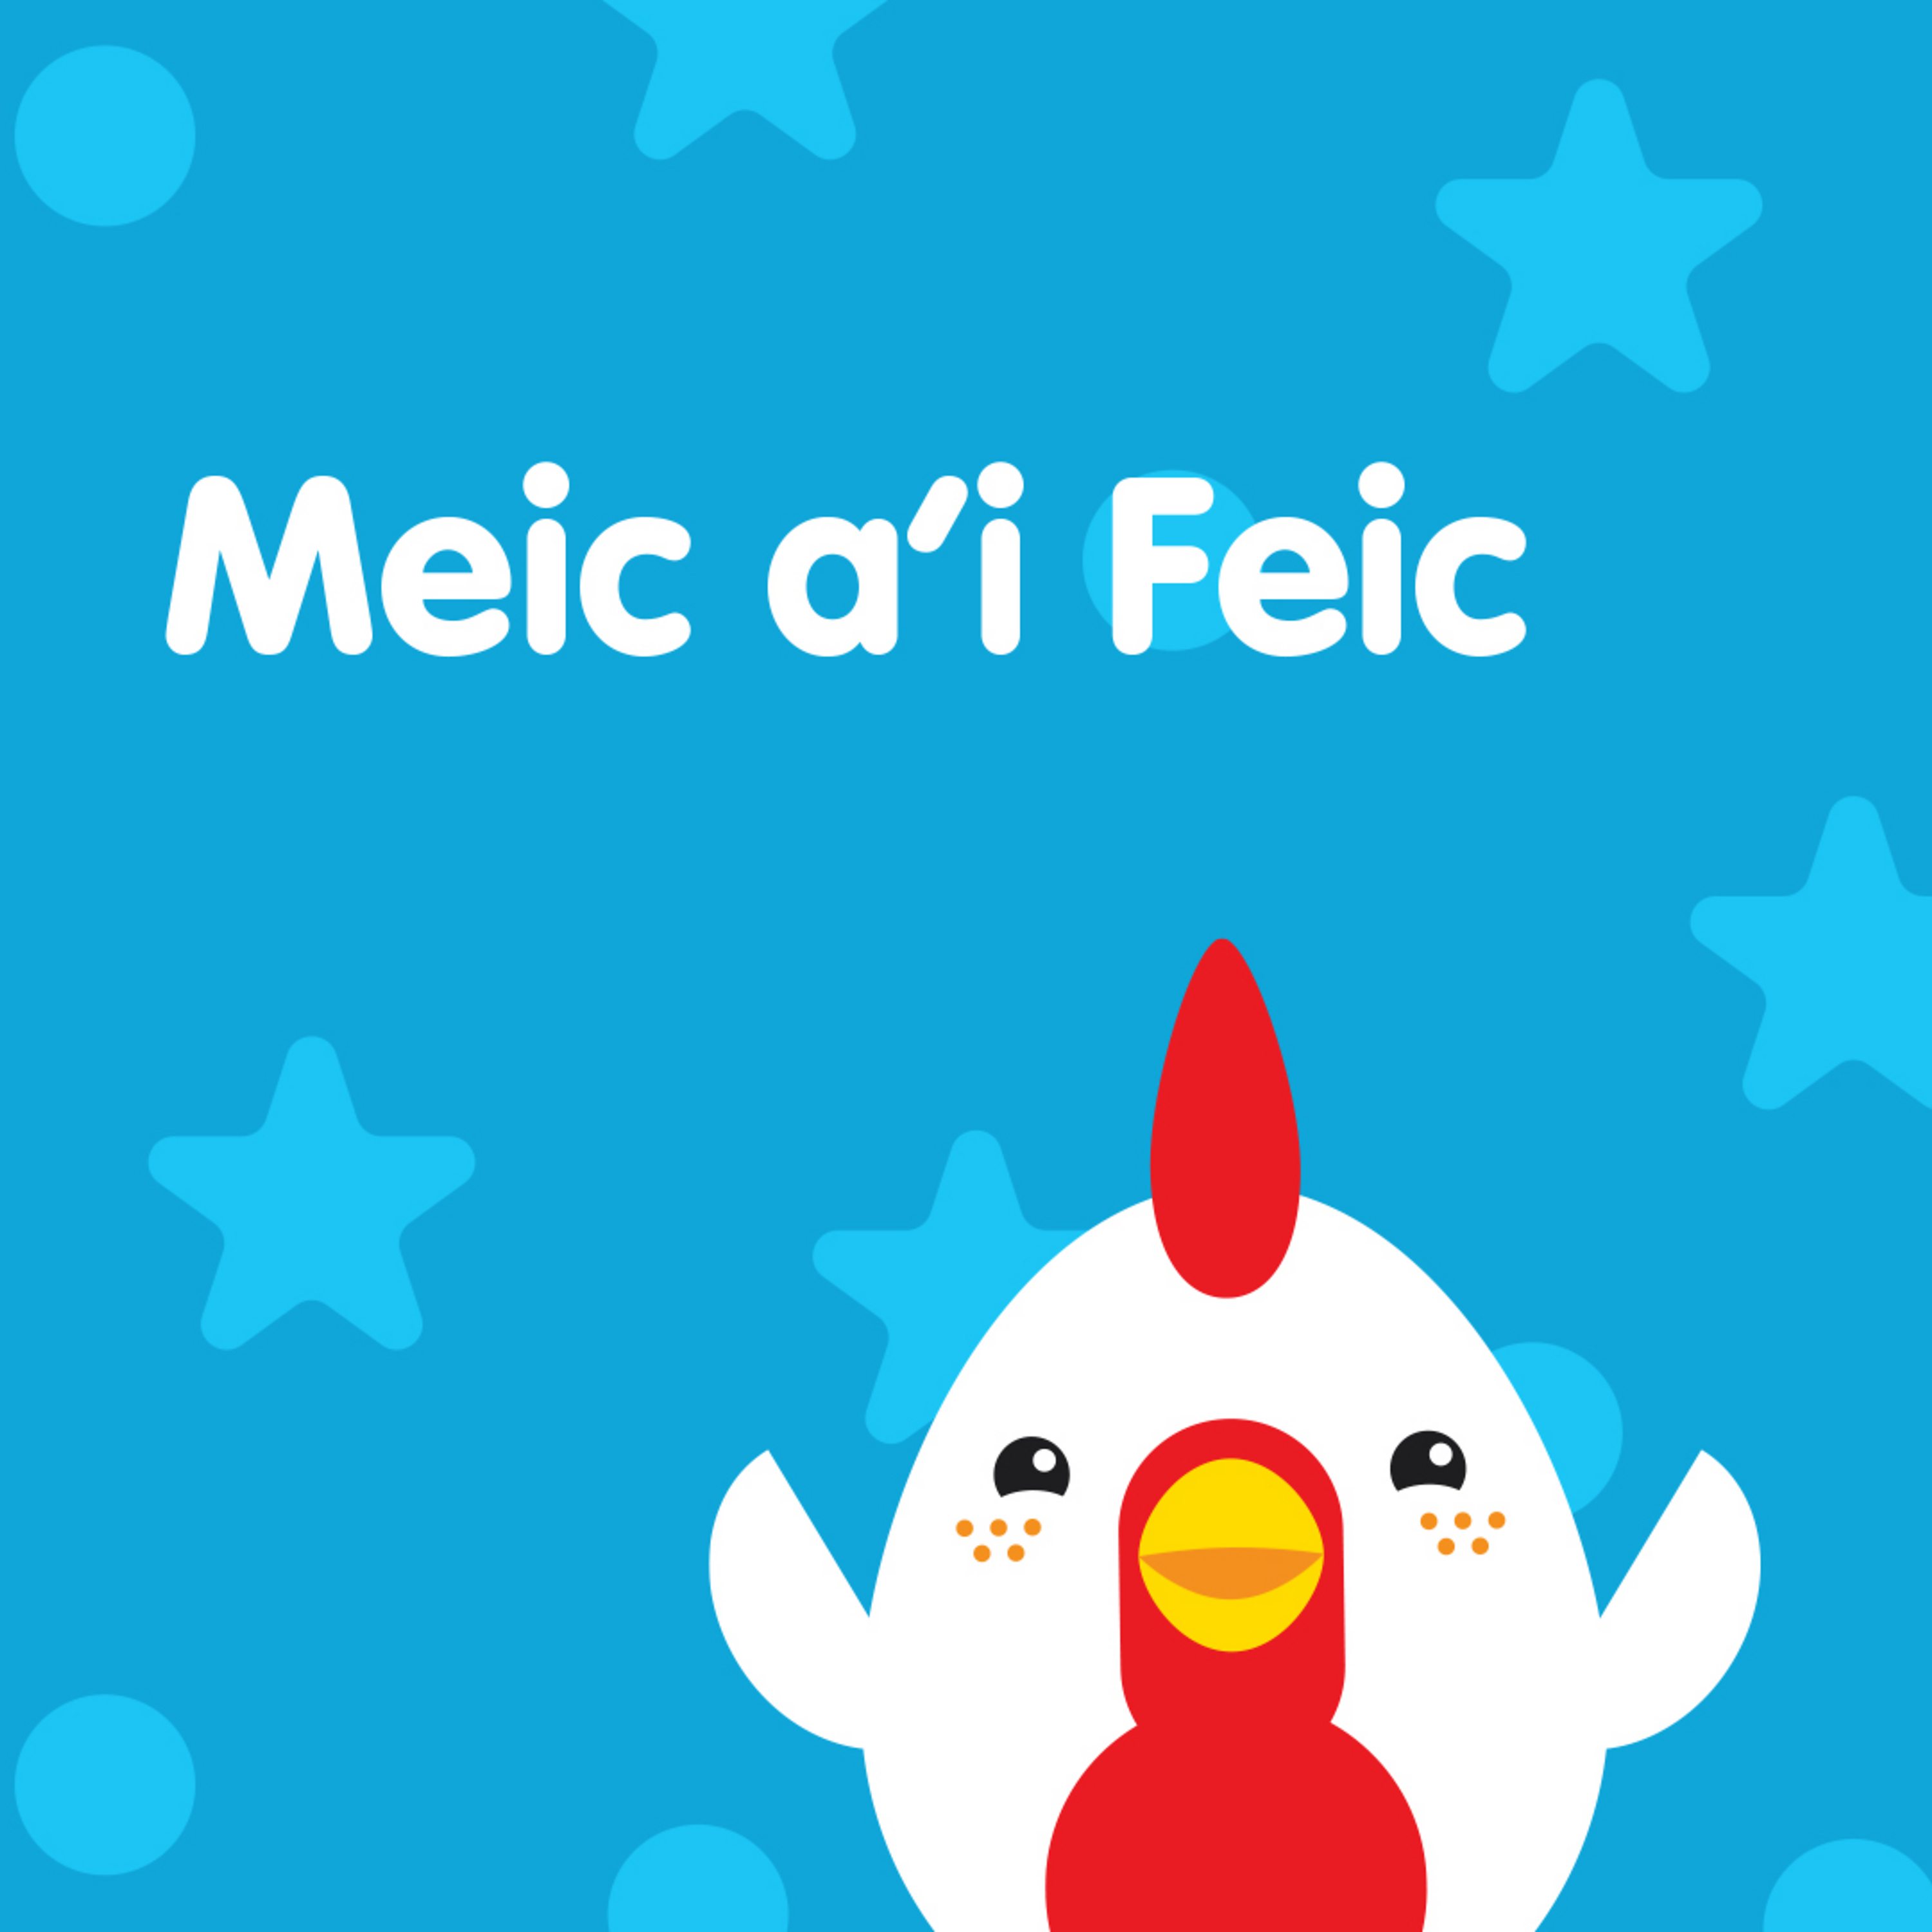 Meic a’i Feic